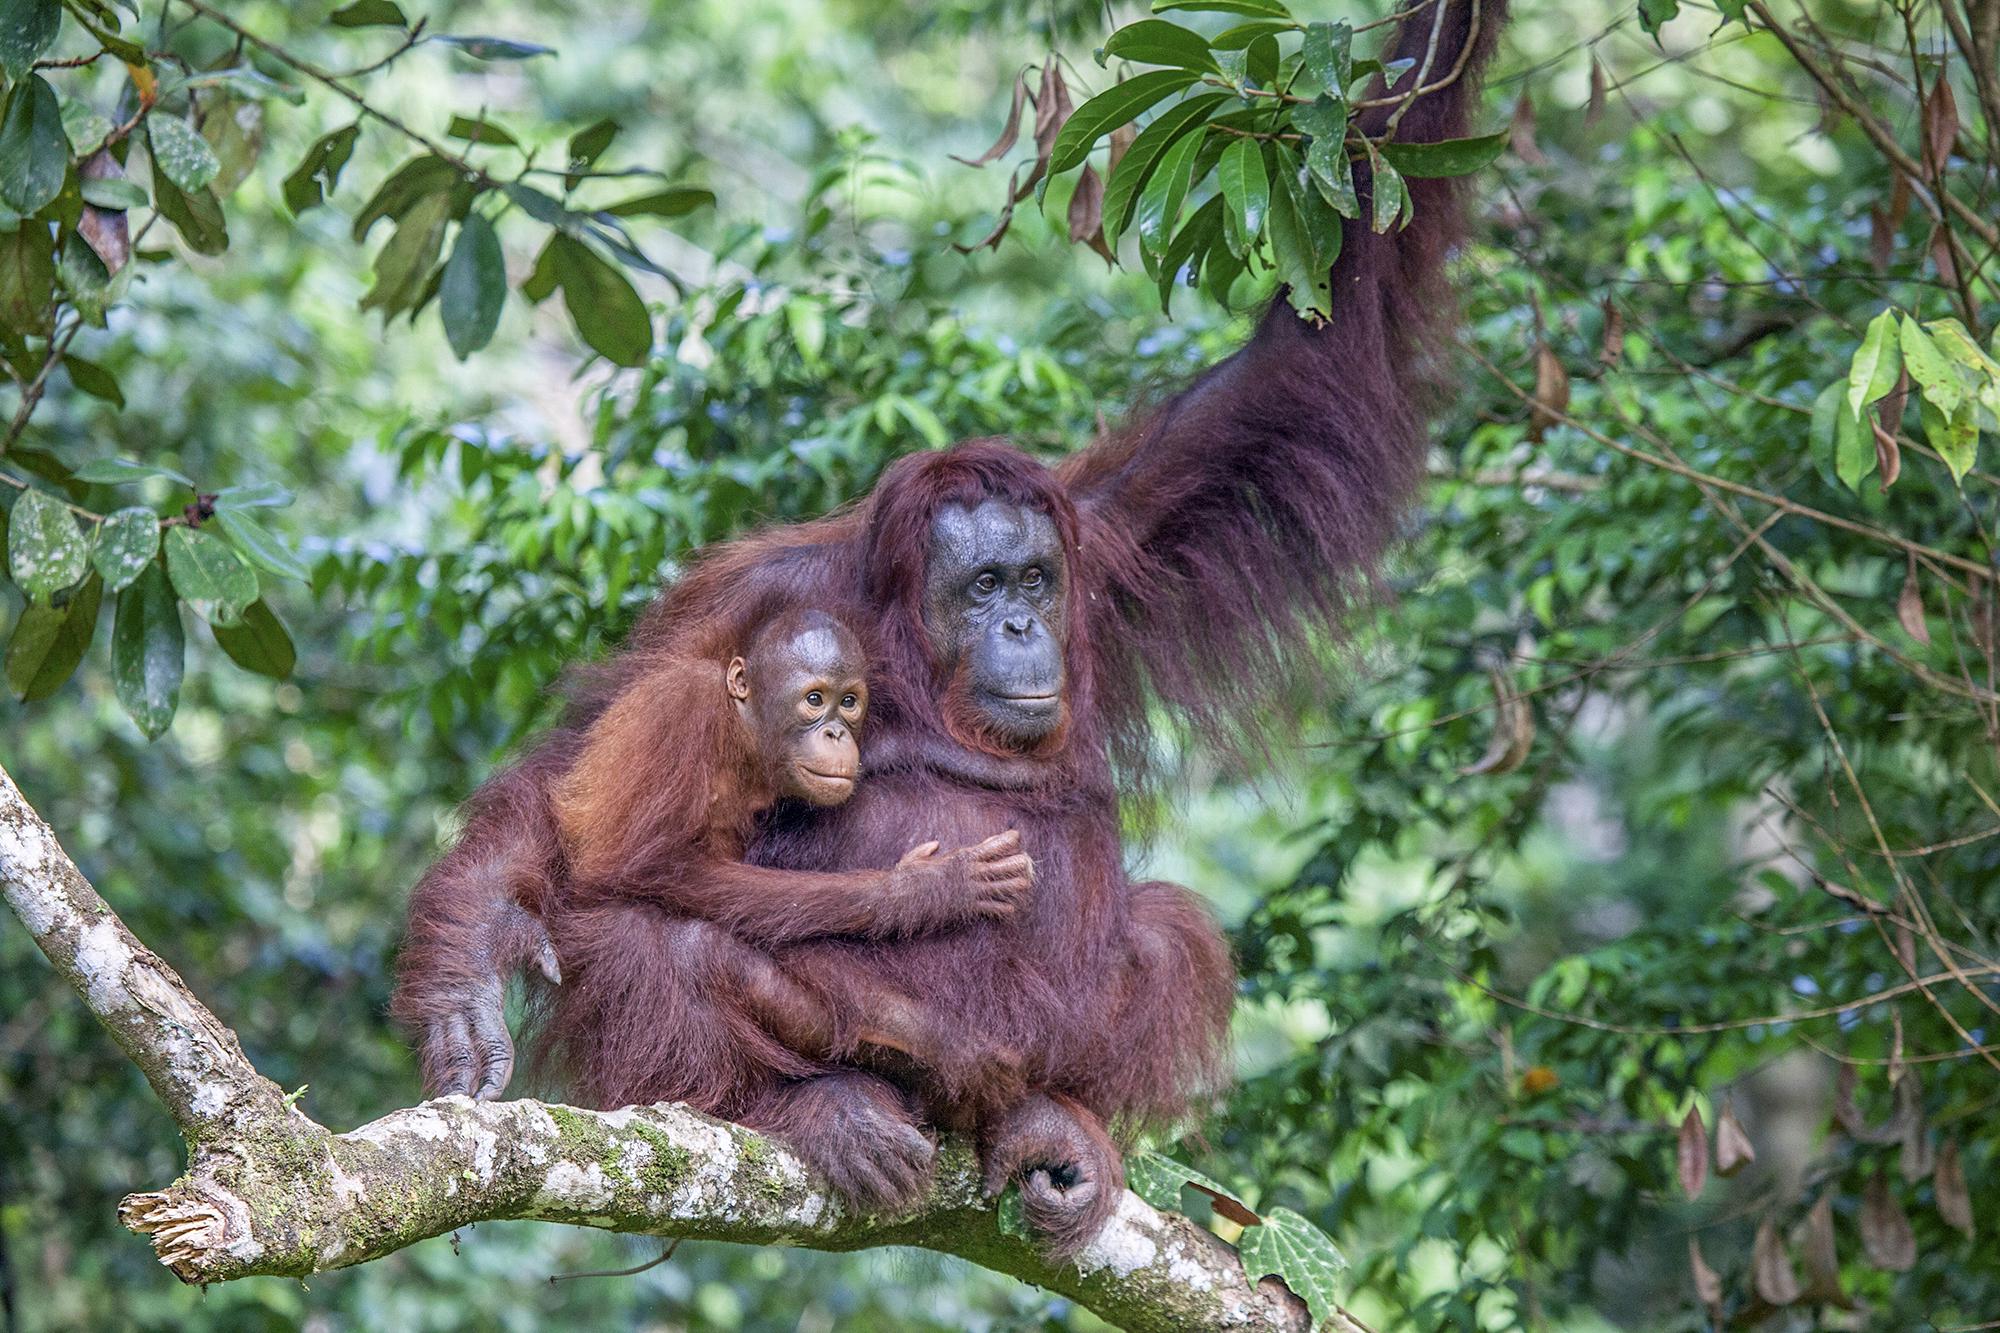 A large mother orangutan holds its baby.